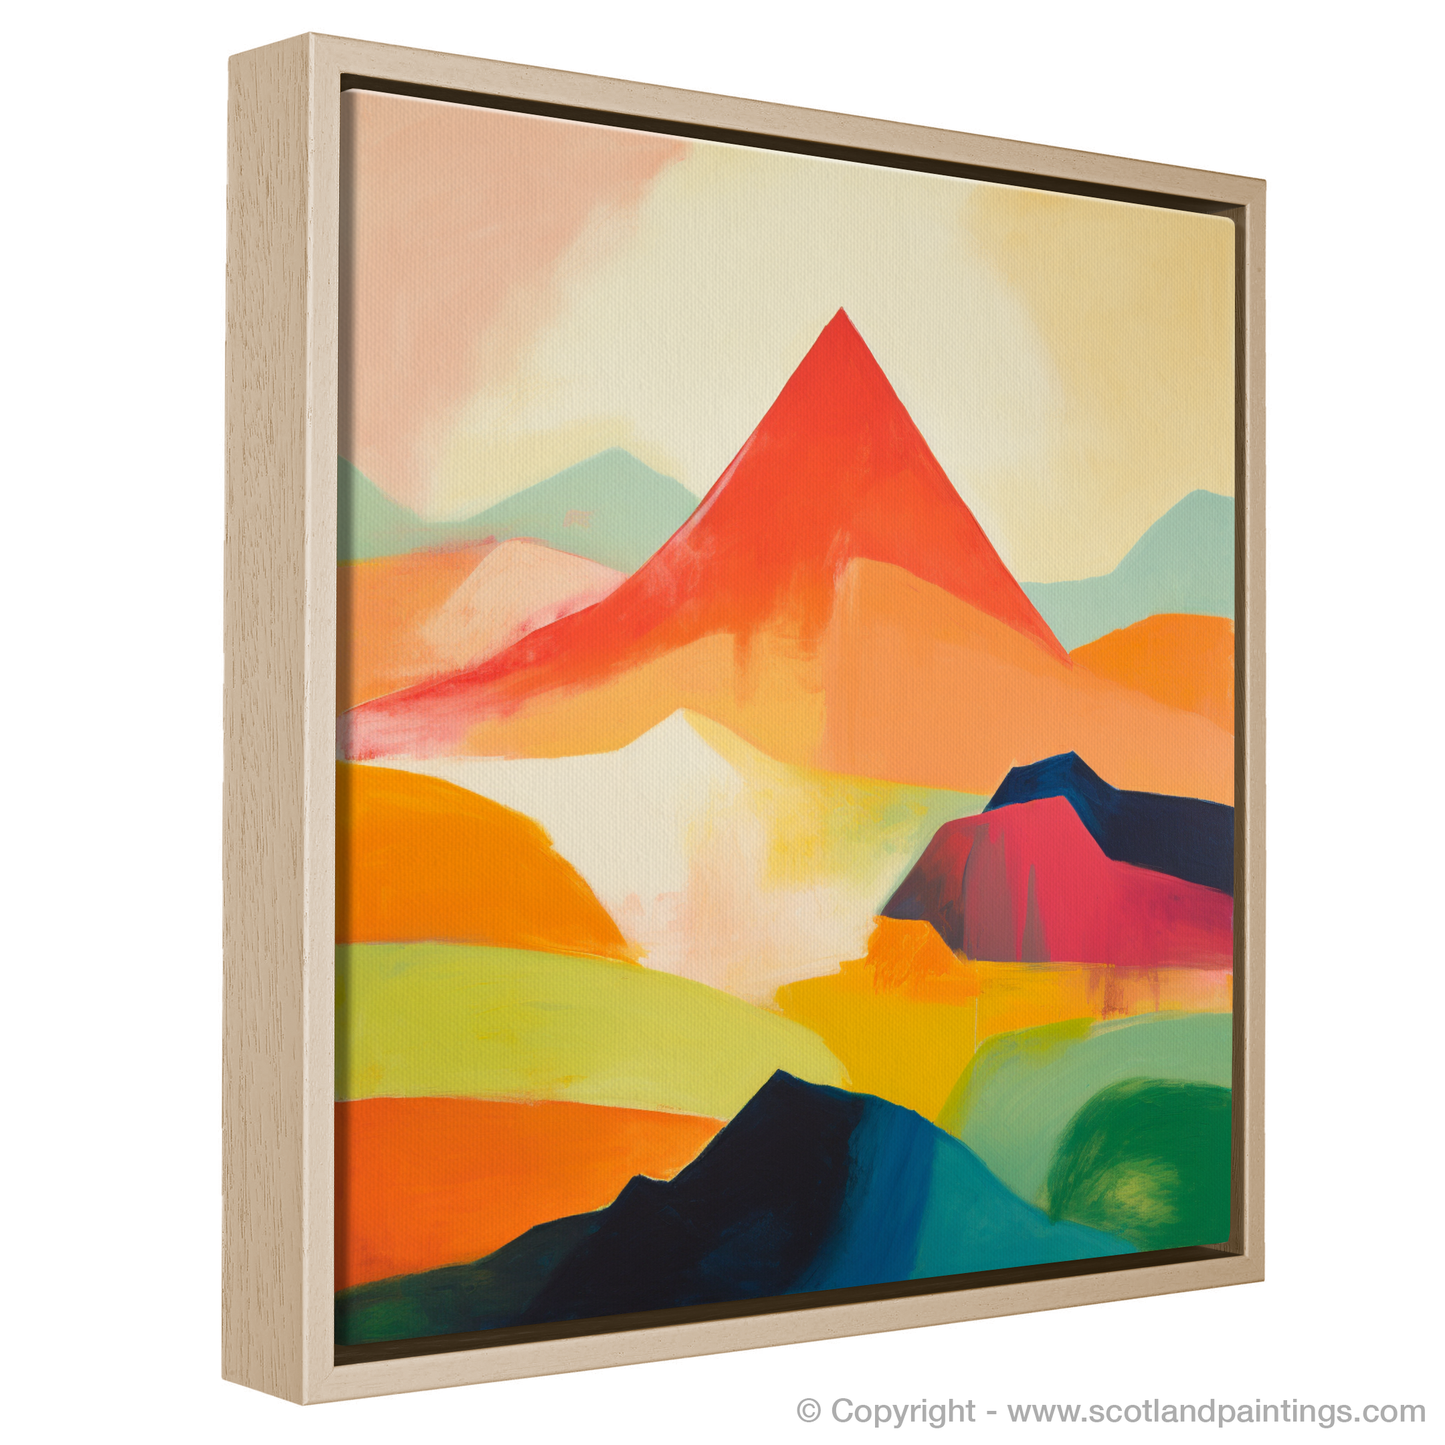 Painting and Art Print of Mount Keen entitled "Abstract Essence of Mount Keen".